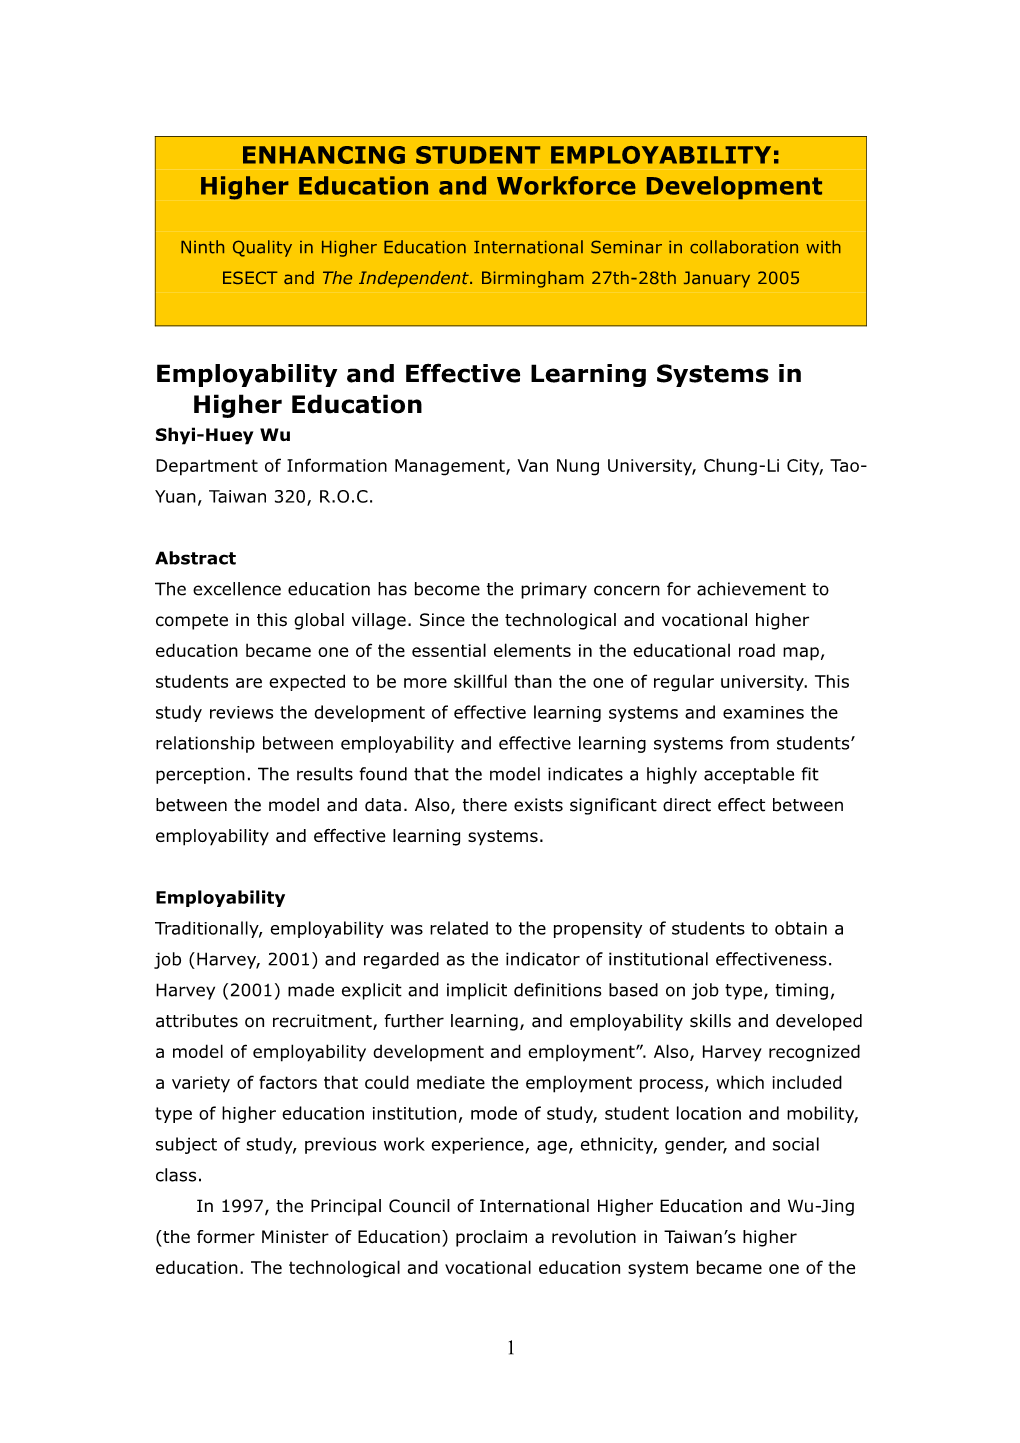 Employability and Effective Learning Systems in Higher Education